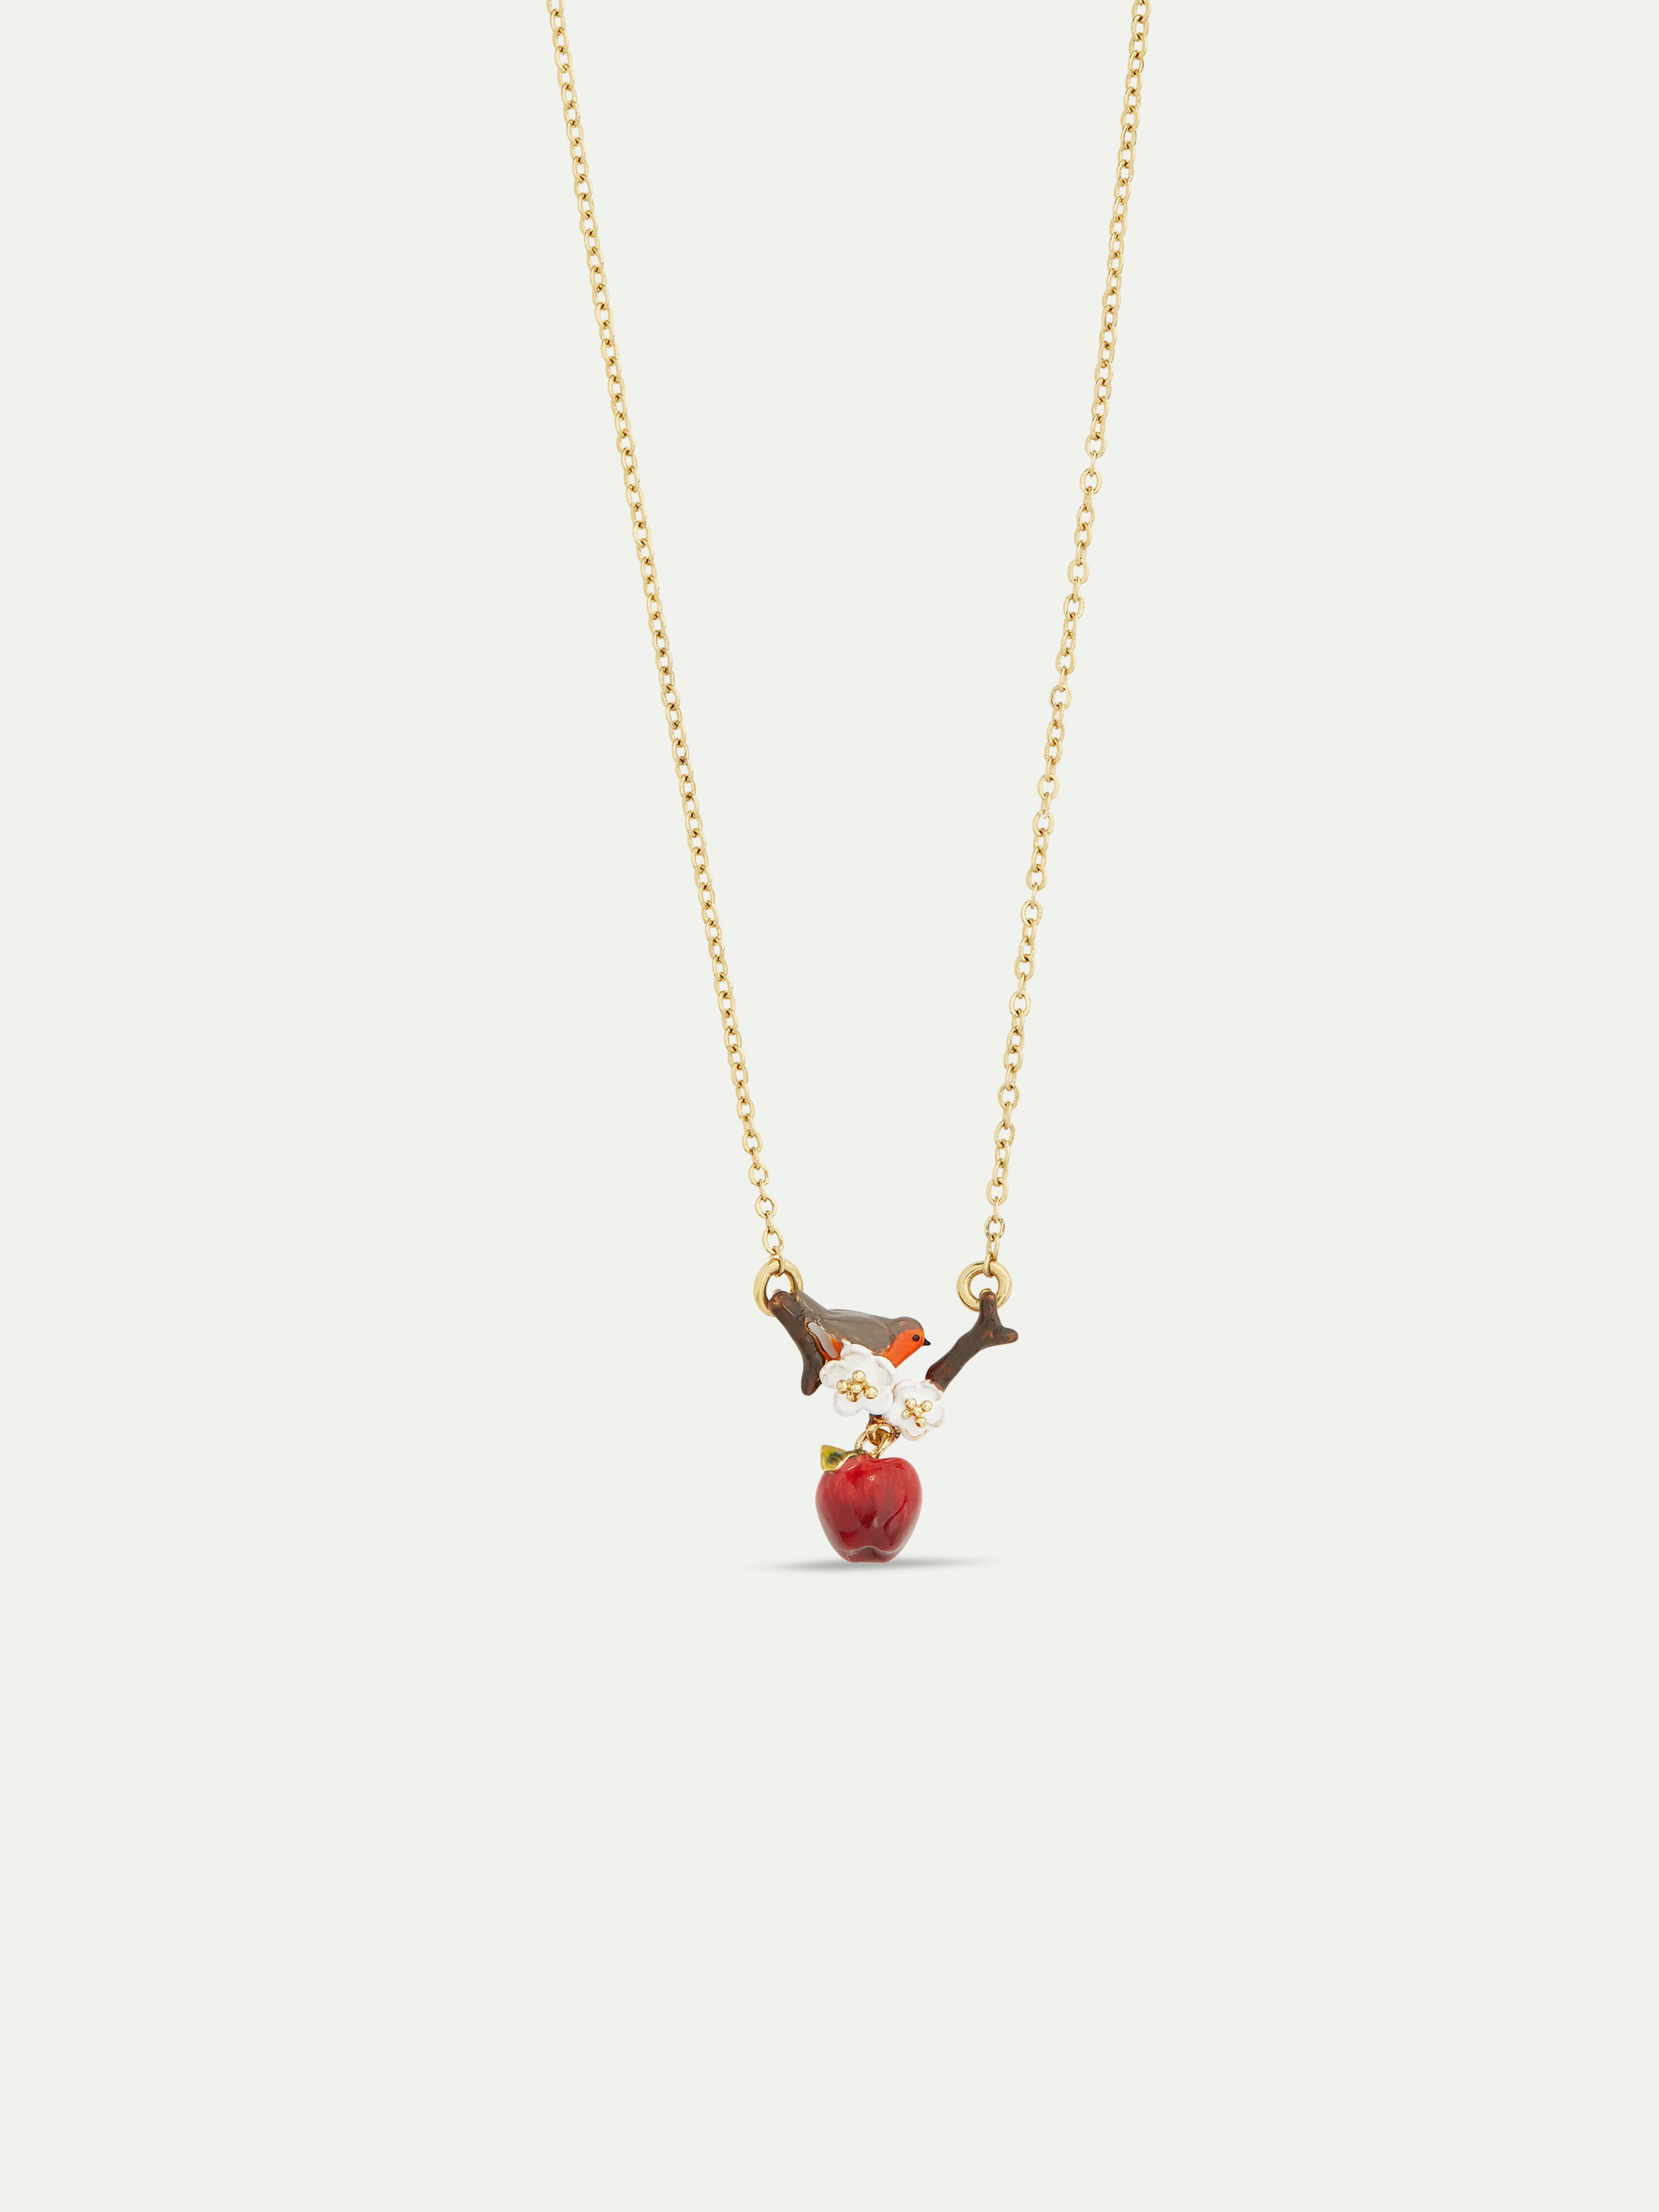 Robin and apple pendant necklace